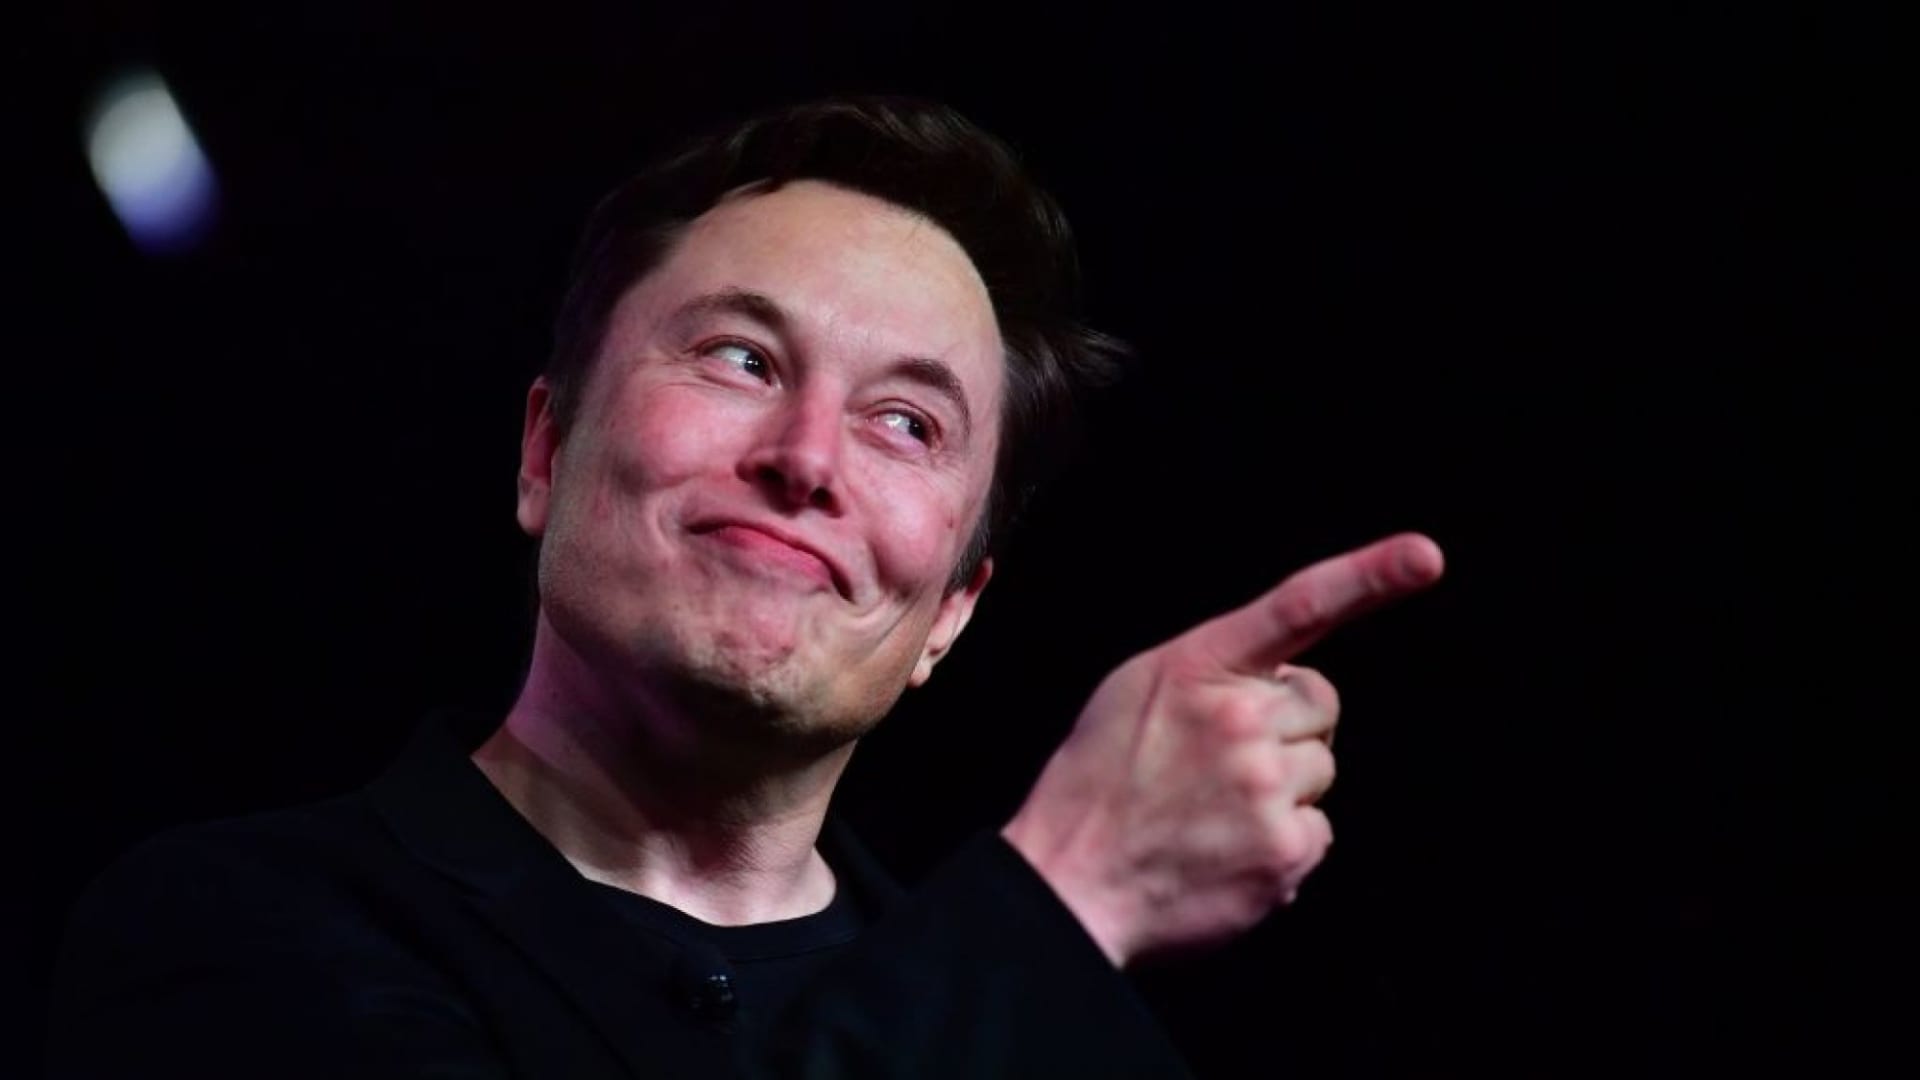 bizarre elon musk facts - Elon Musk believes that the United States is "[inarguably] the greatest country that has ever existed on Earth", describing it as "the greatest force for good of any country that's ever been" and believes outright that there "wou